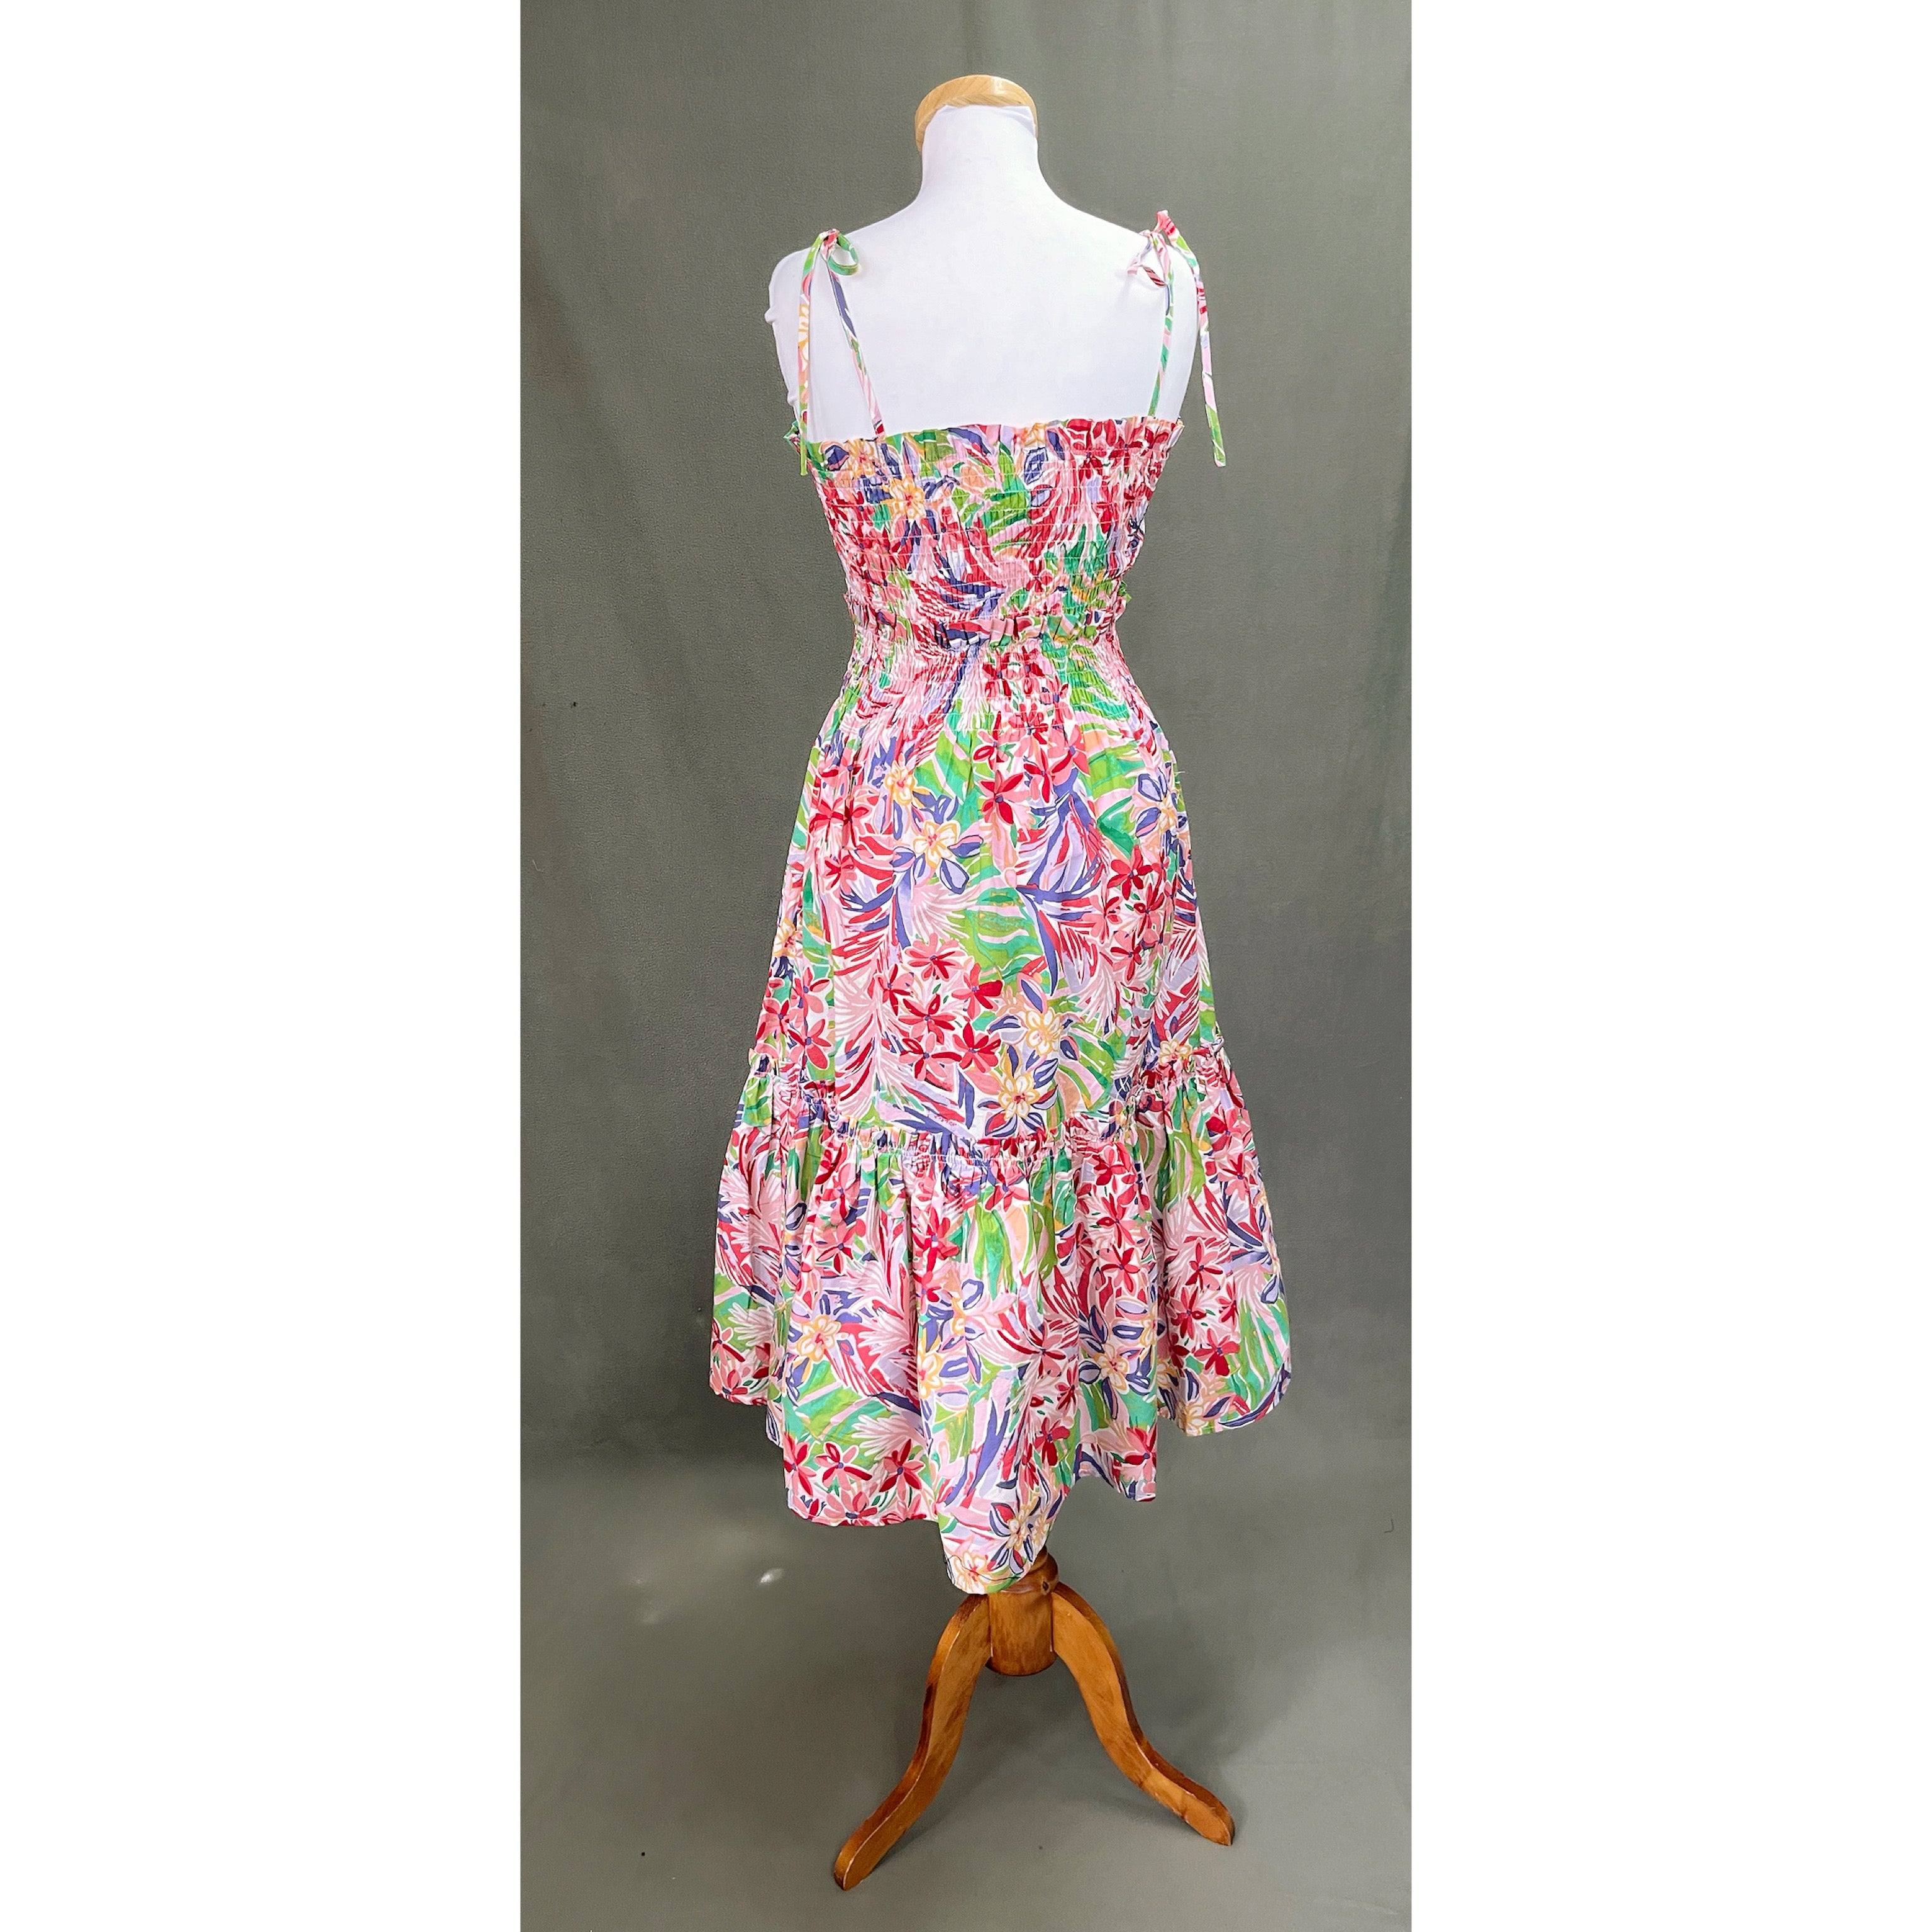 Pinch pink floral dress, size S, NEW WITH TAGS!